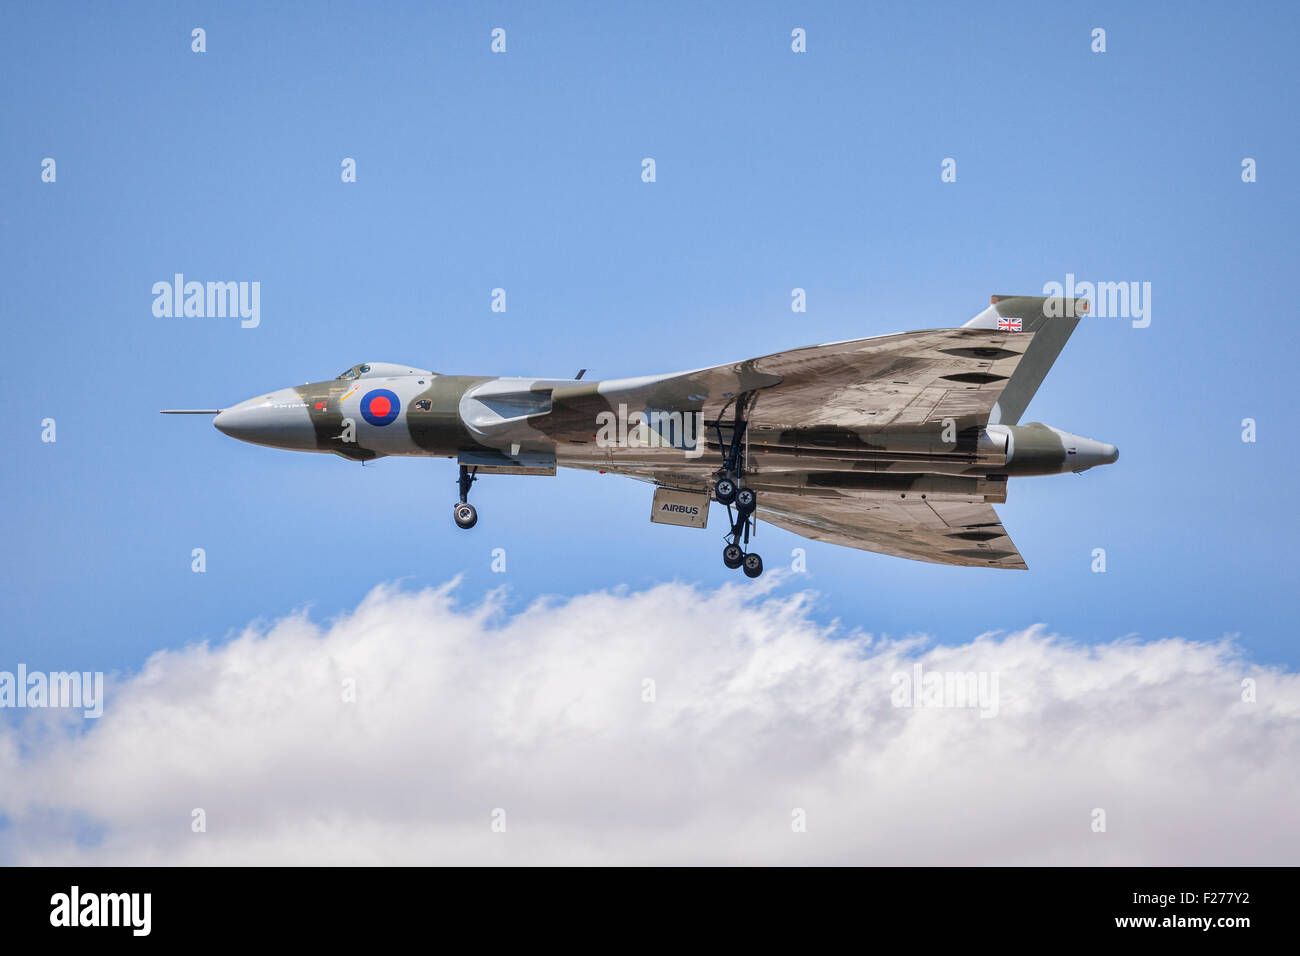 The last flying Avro Vulcan B2 bomber aircraft makes a low pass with landing gear down at RIAT 2015, at Fairford... Stock Photo